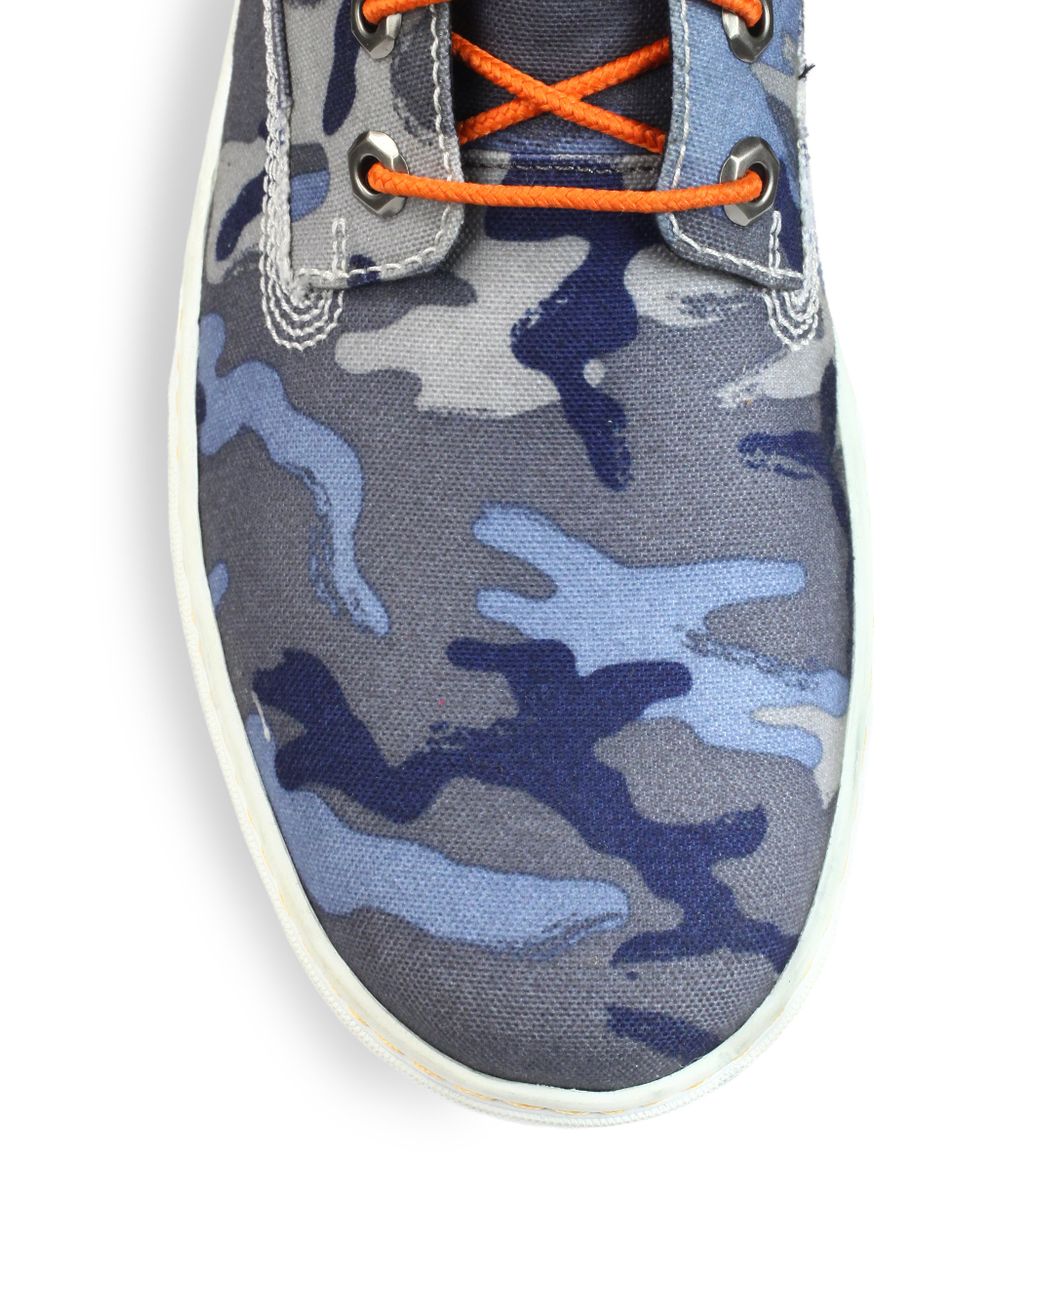 Timberland Blue Camo Boots for Men | Lyst